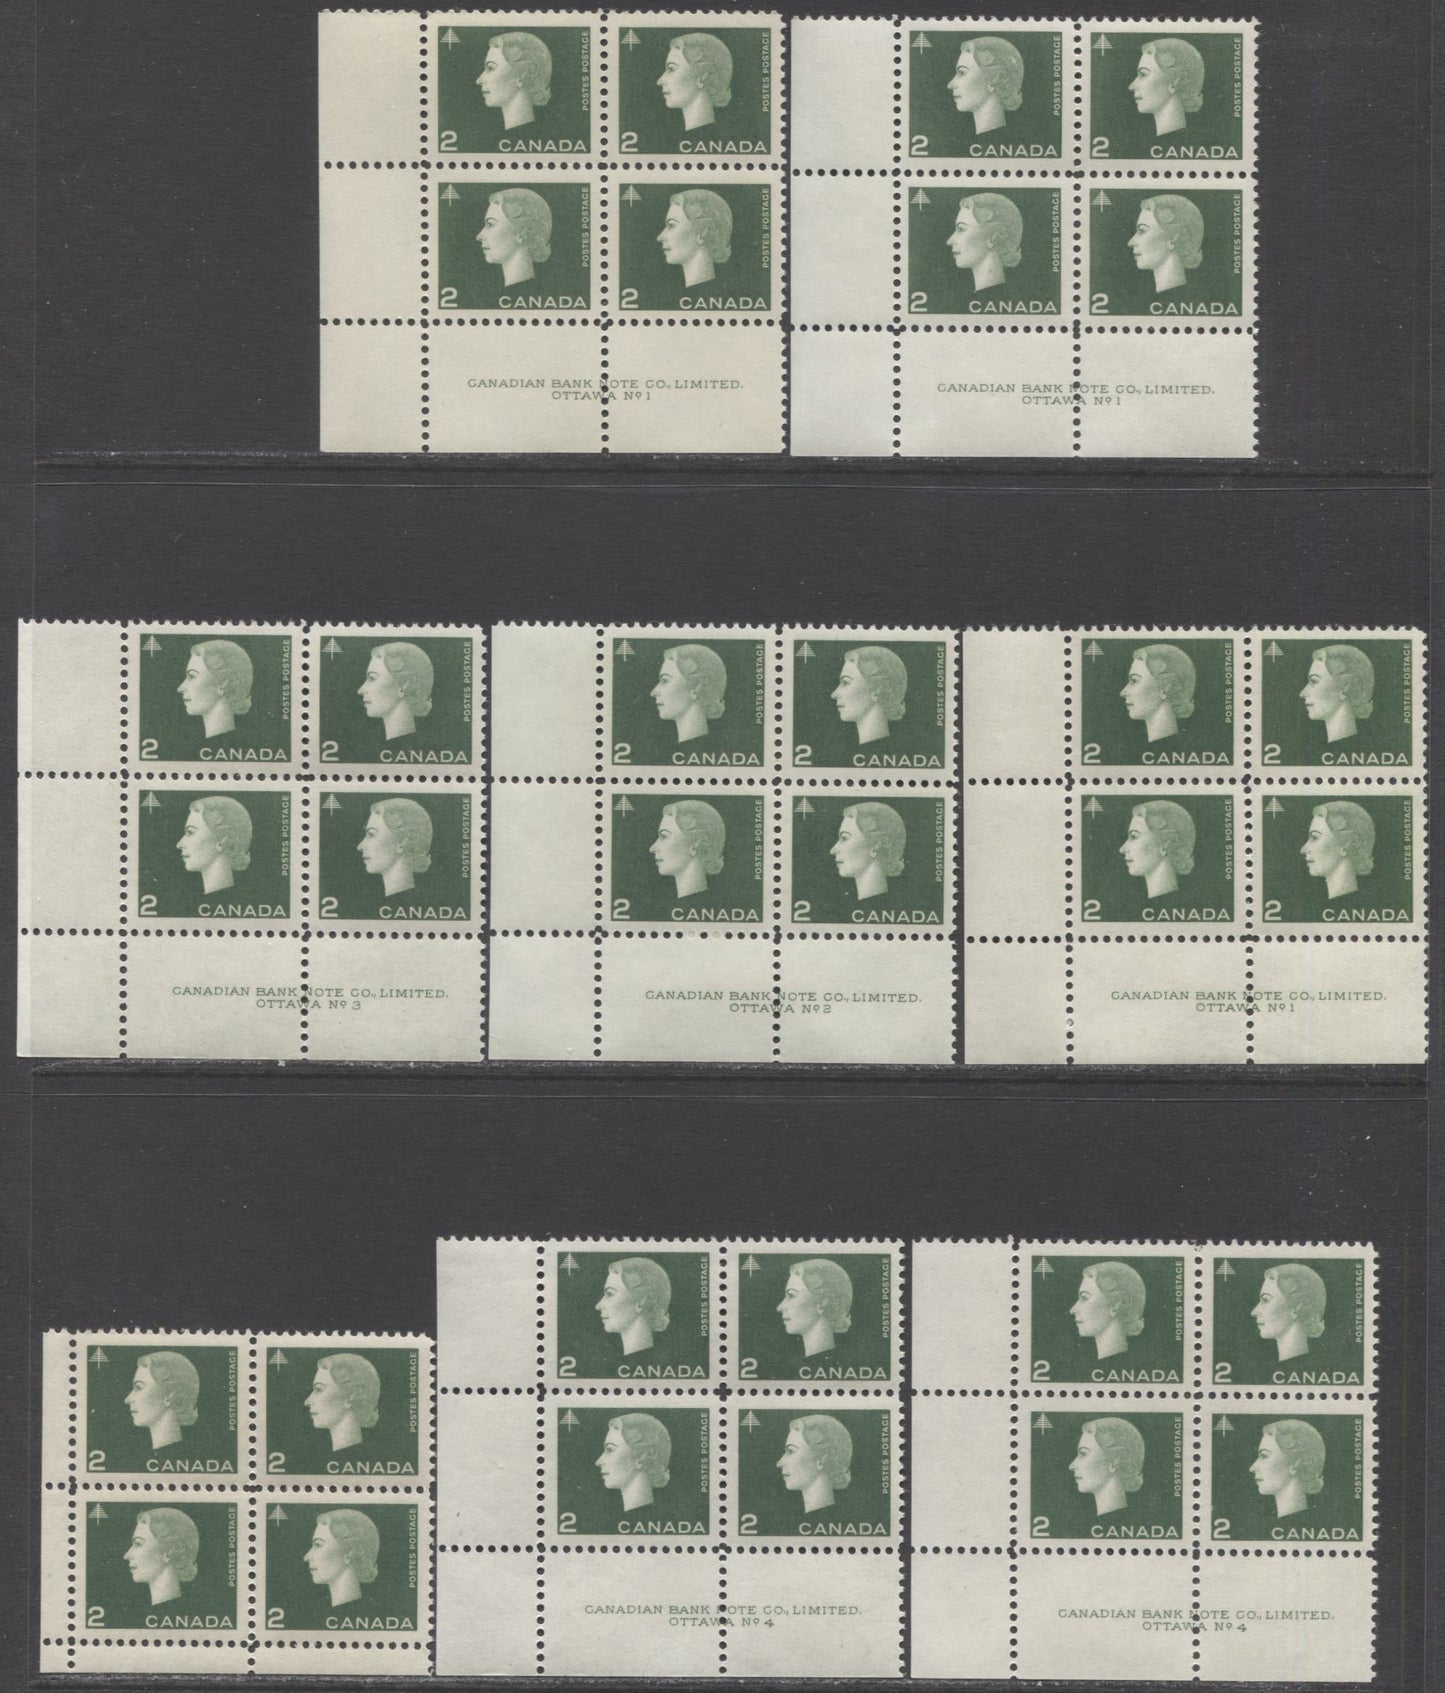 Lot 77 Canada #402 2c Green Forestry, 1962-1963 Cameo Issue, 8 VFNH LL Plates 1-4 & F/S Blocks Of 4 With Shade & Gum Varieties